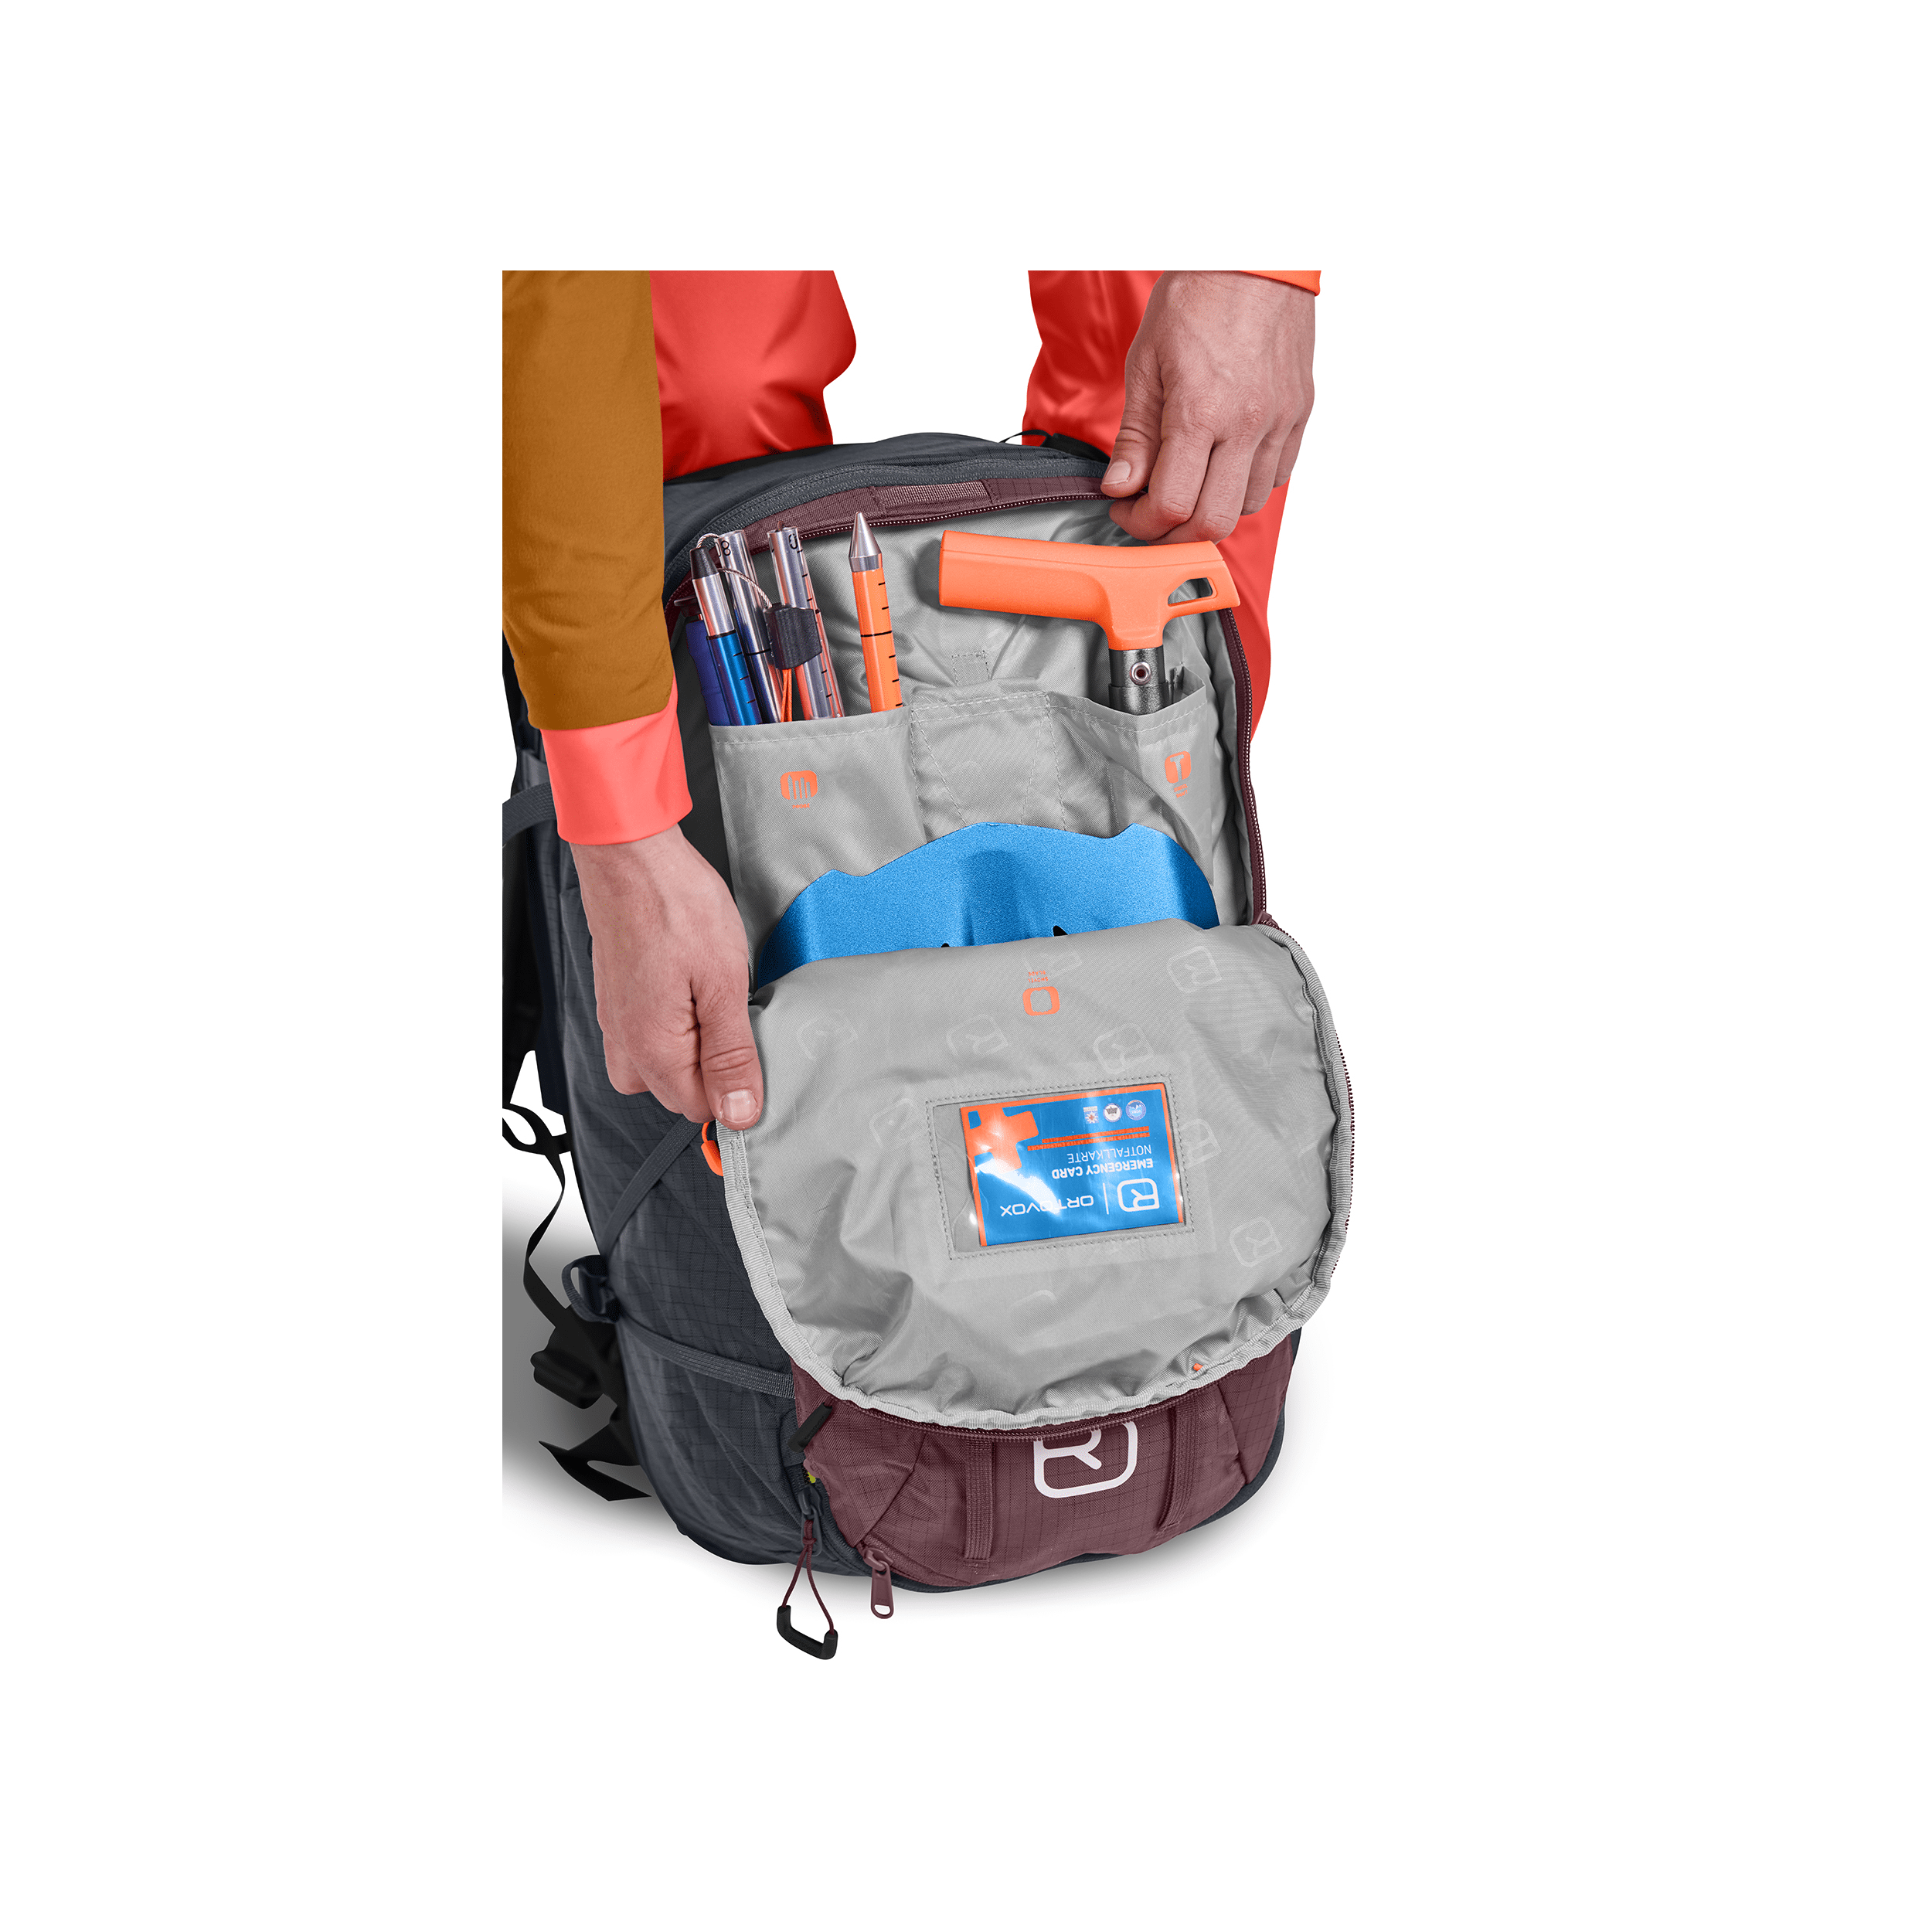 ortovox Avalanche Airbag Litric Tour 36S Avalanche Airbag